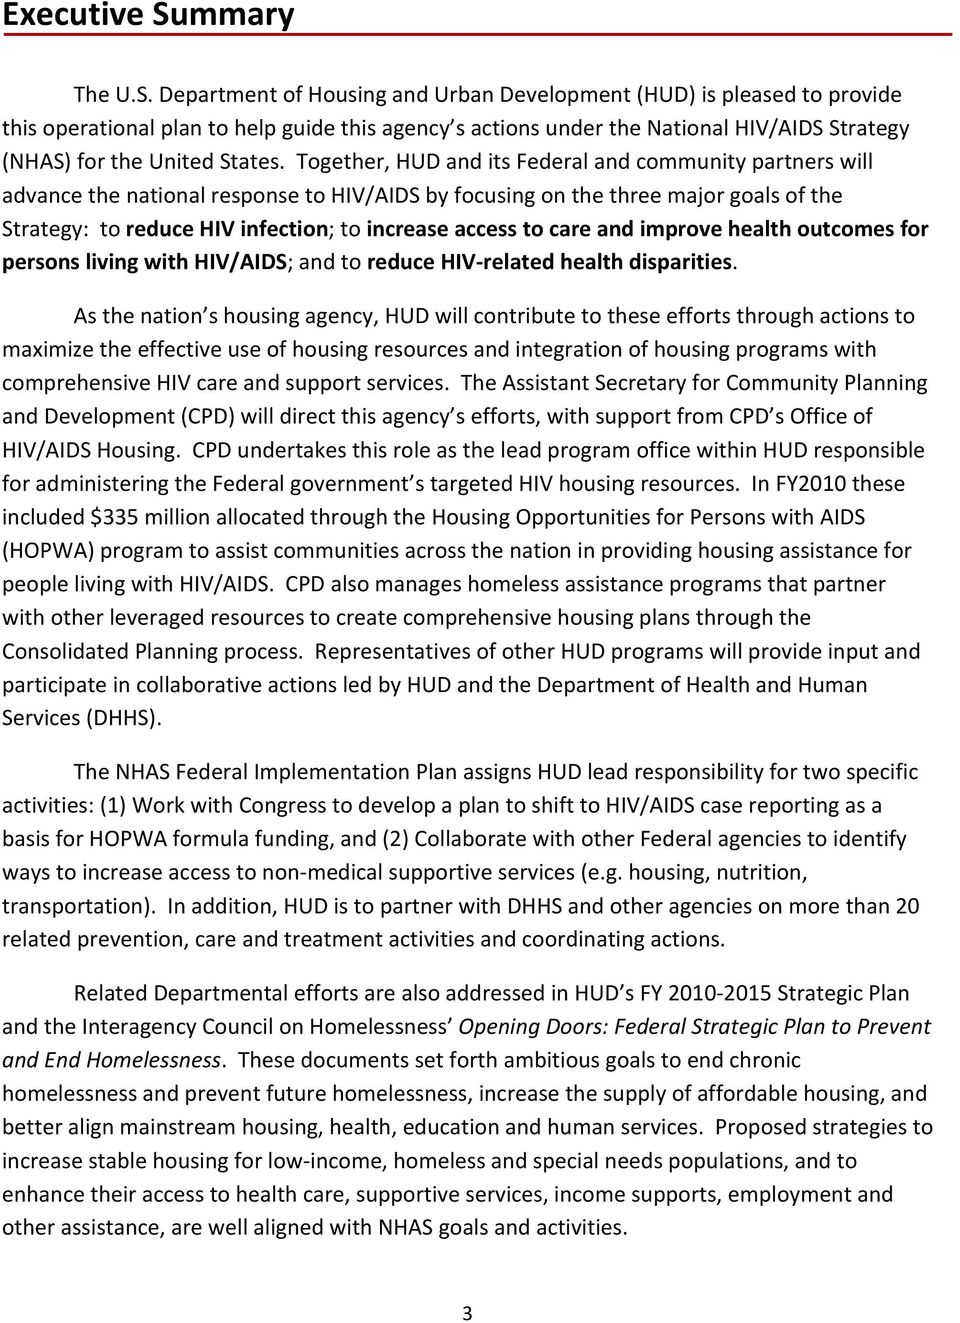 Department of Housing and Urban Development (HUD) is pleased to provide this operational plan to help guide this agency s actions under the National HIV/AIDS Strategy (NHAS) for the United States.